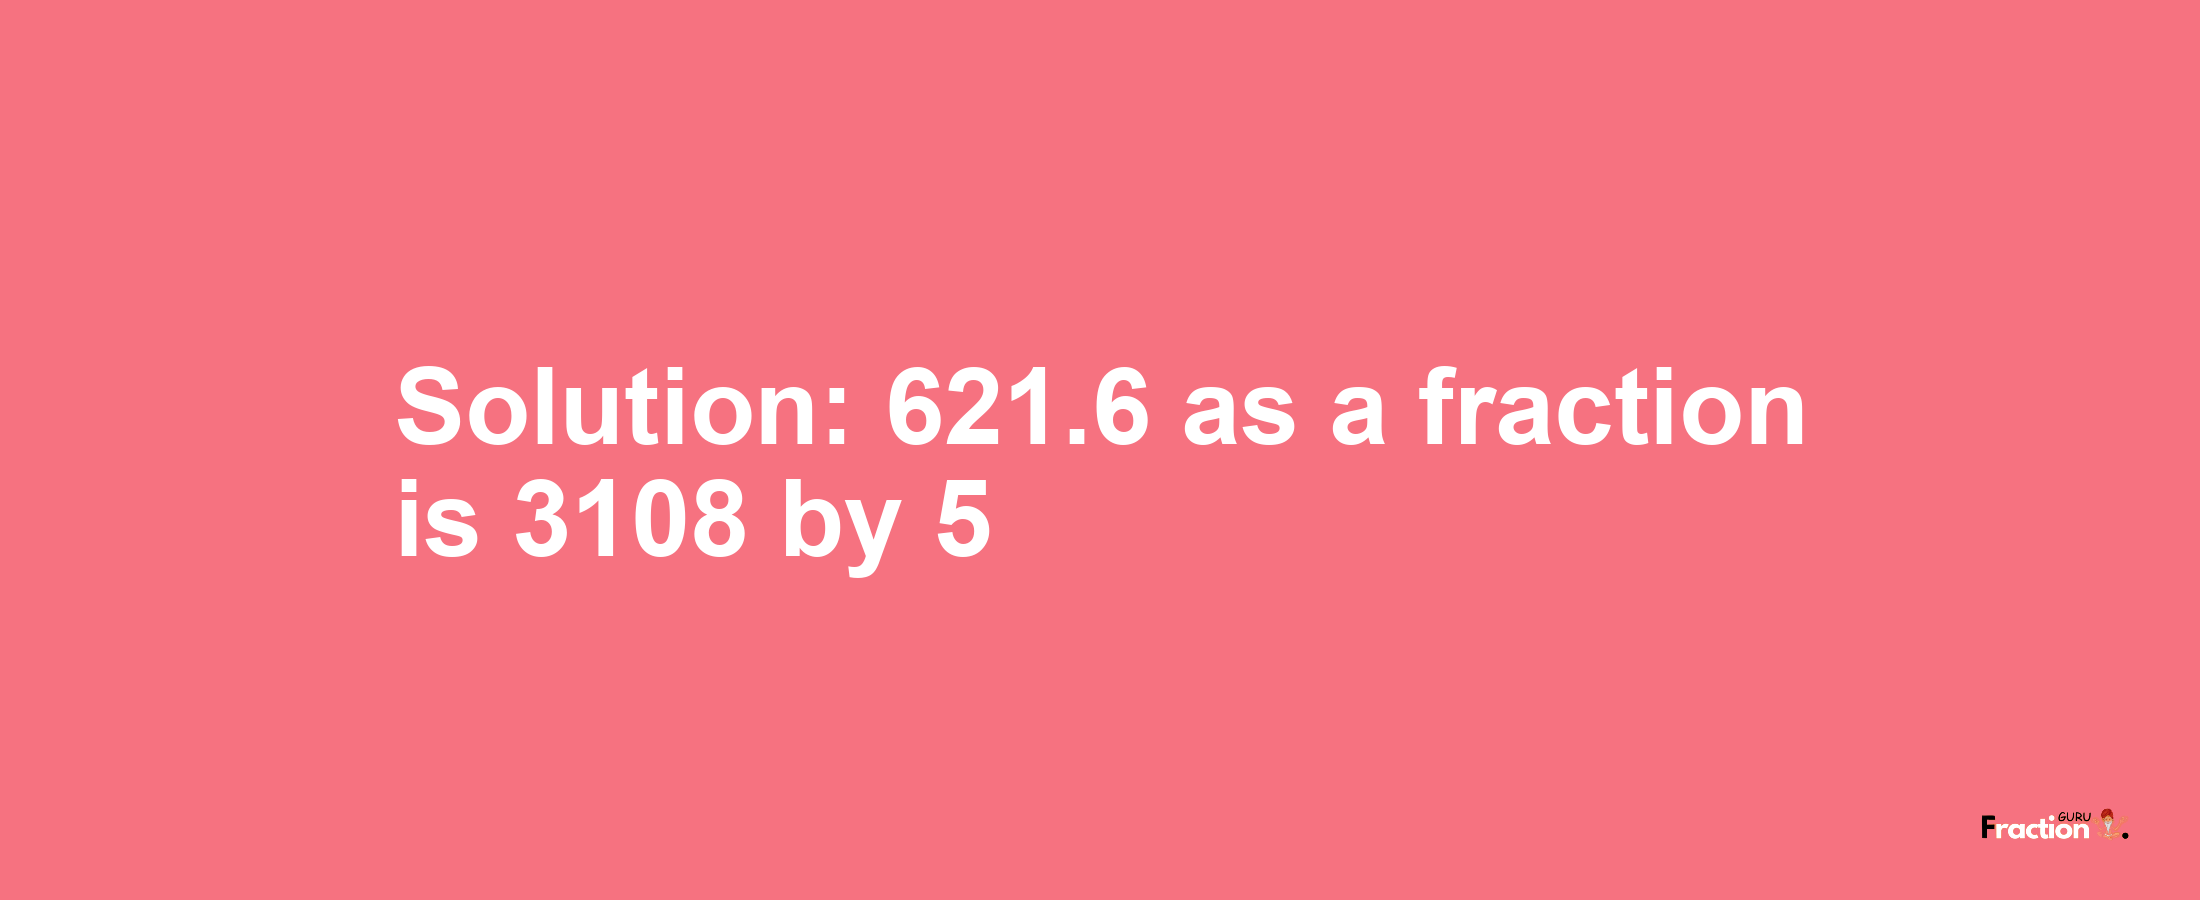 Solution:621.6 as a fraction is 3108/5